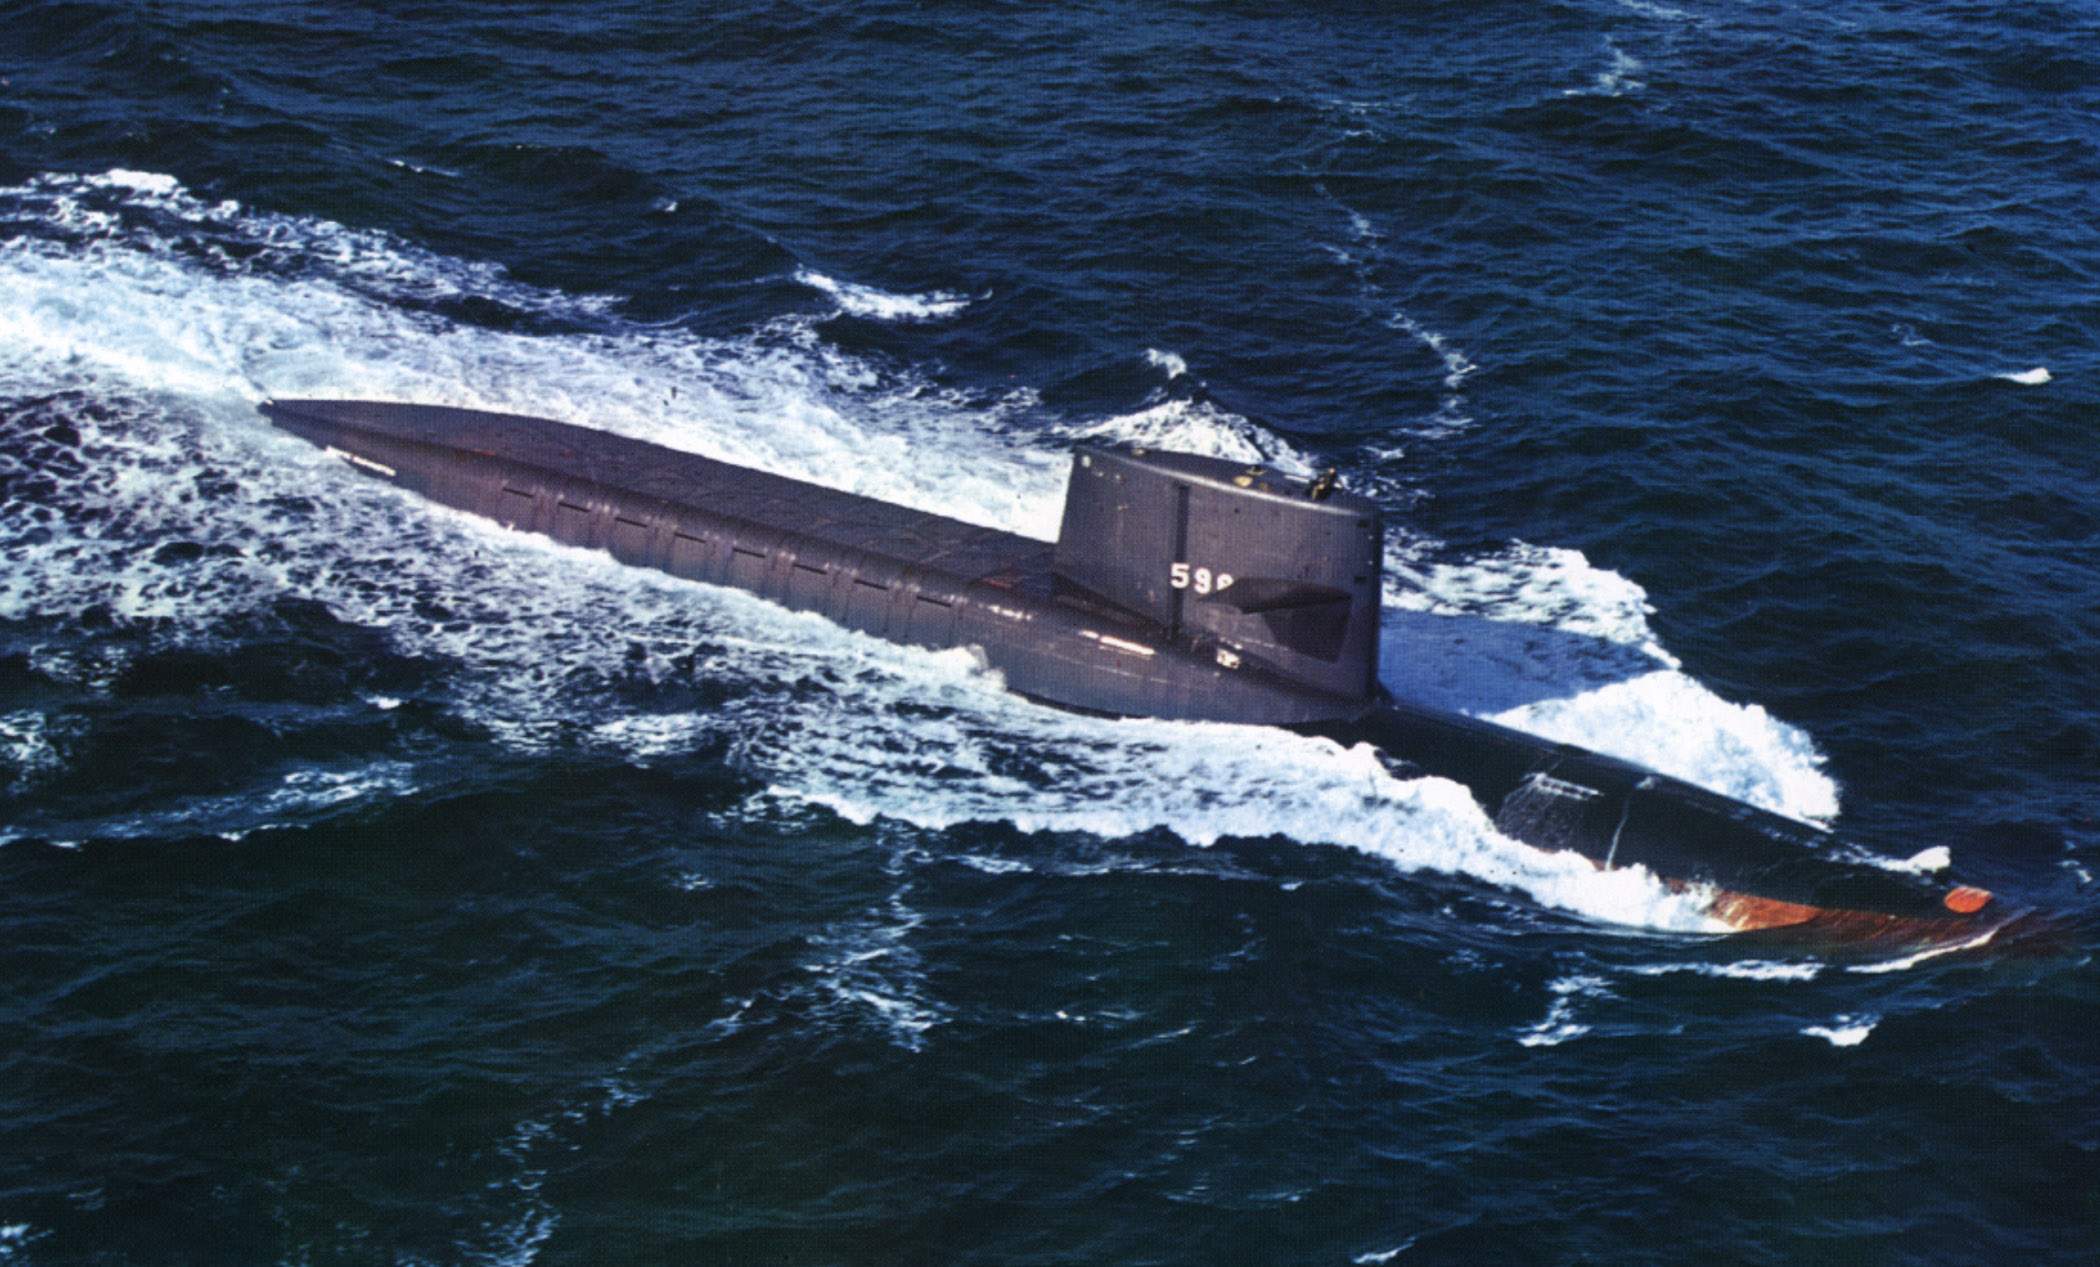 1960: The First Ballistic Missile Launched from a Submerged Submarine